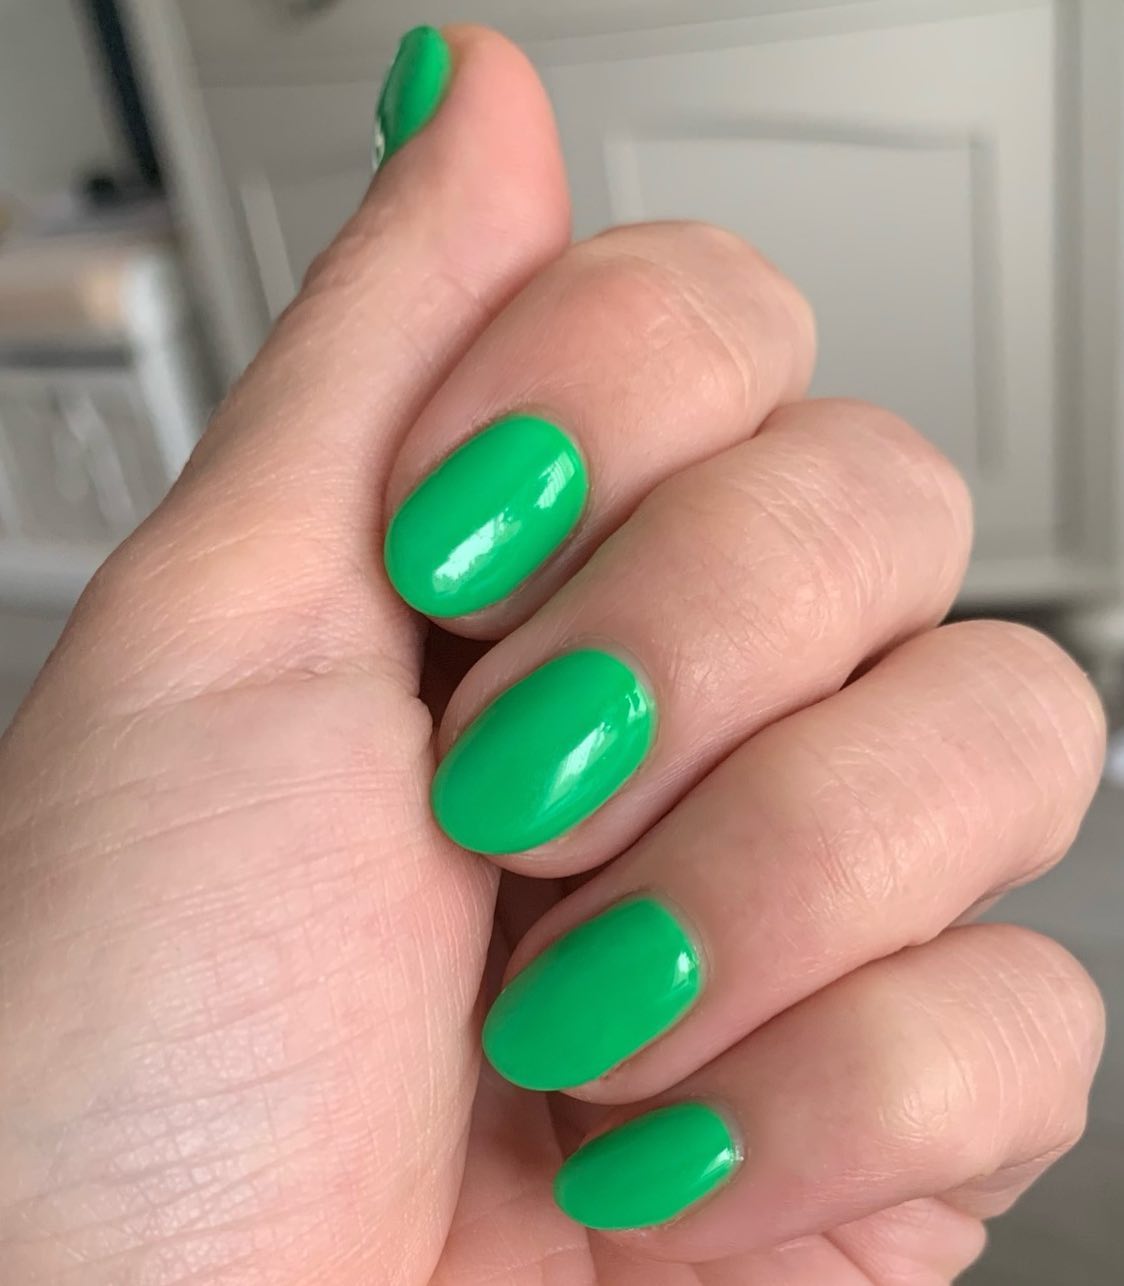 If you like green nail polishes, you will find this perfect shade of bright green color amazing. Go for it right now!